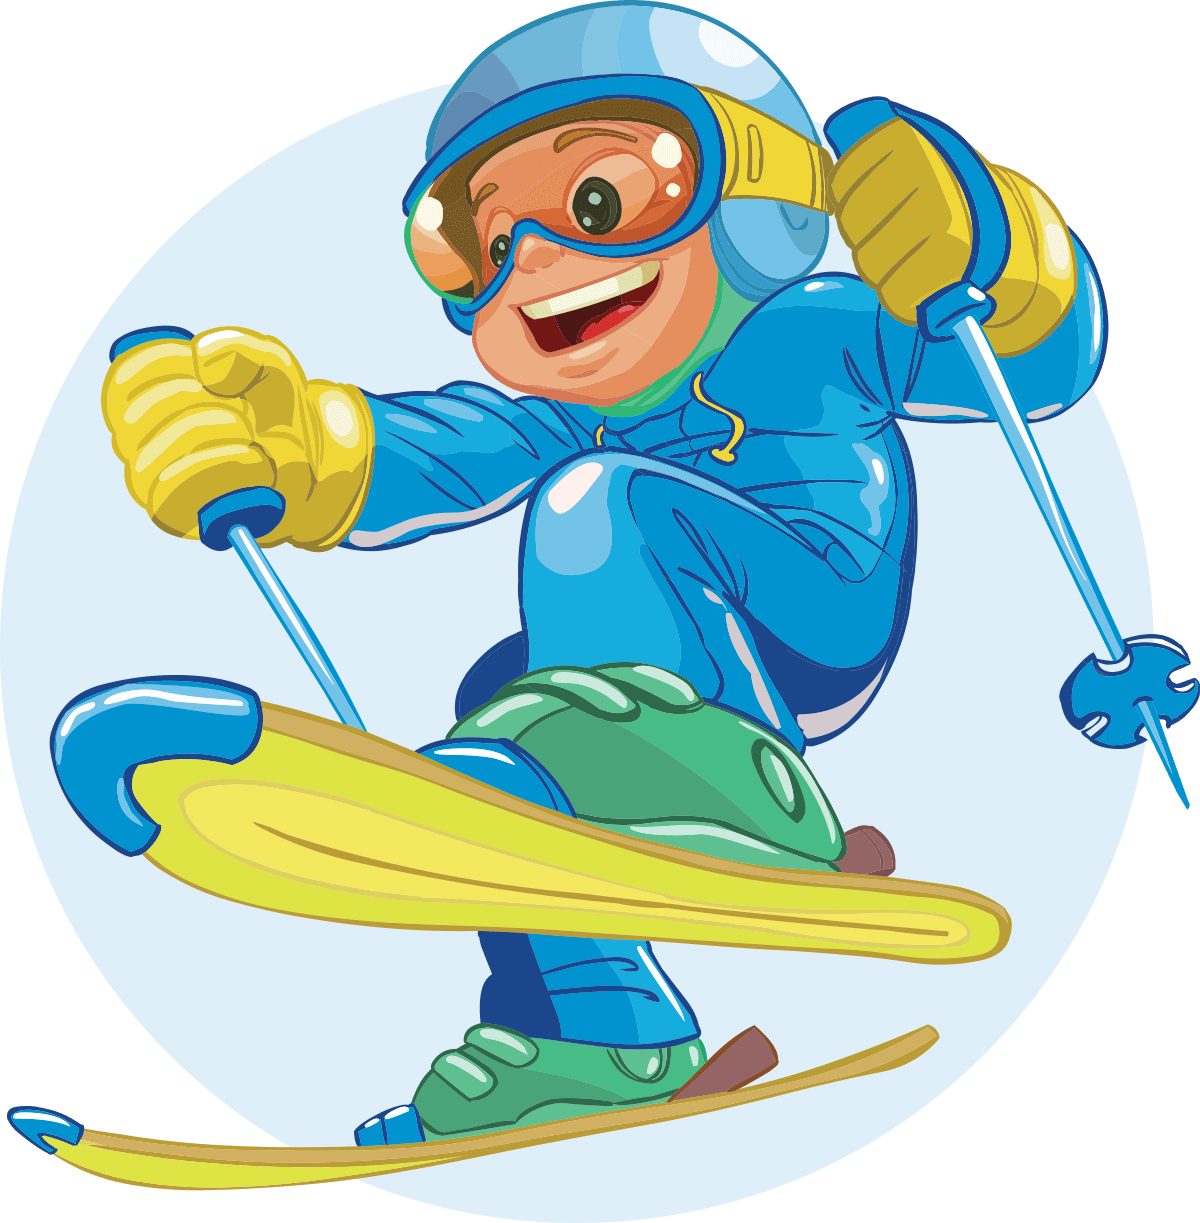 Kids rd and th. Snowboarding clipart vacation